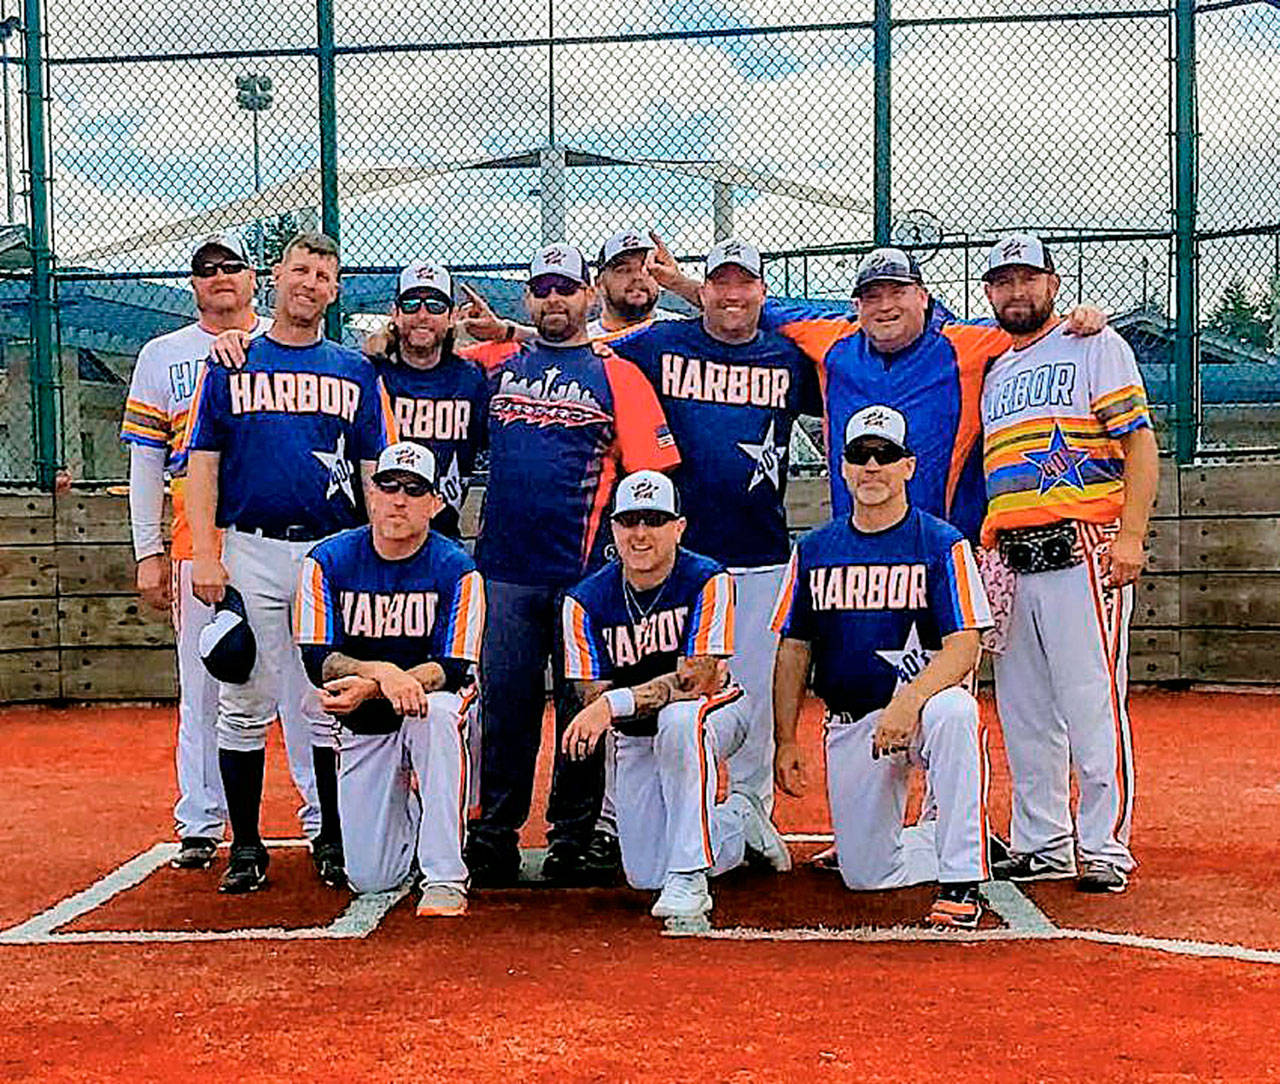 The Place to Be 40’s qualified for the softball world championships in Las Vegas after winning one tournament and placing second in two others over the summer. (Submitted photo)